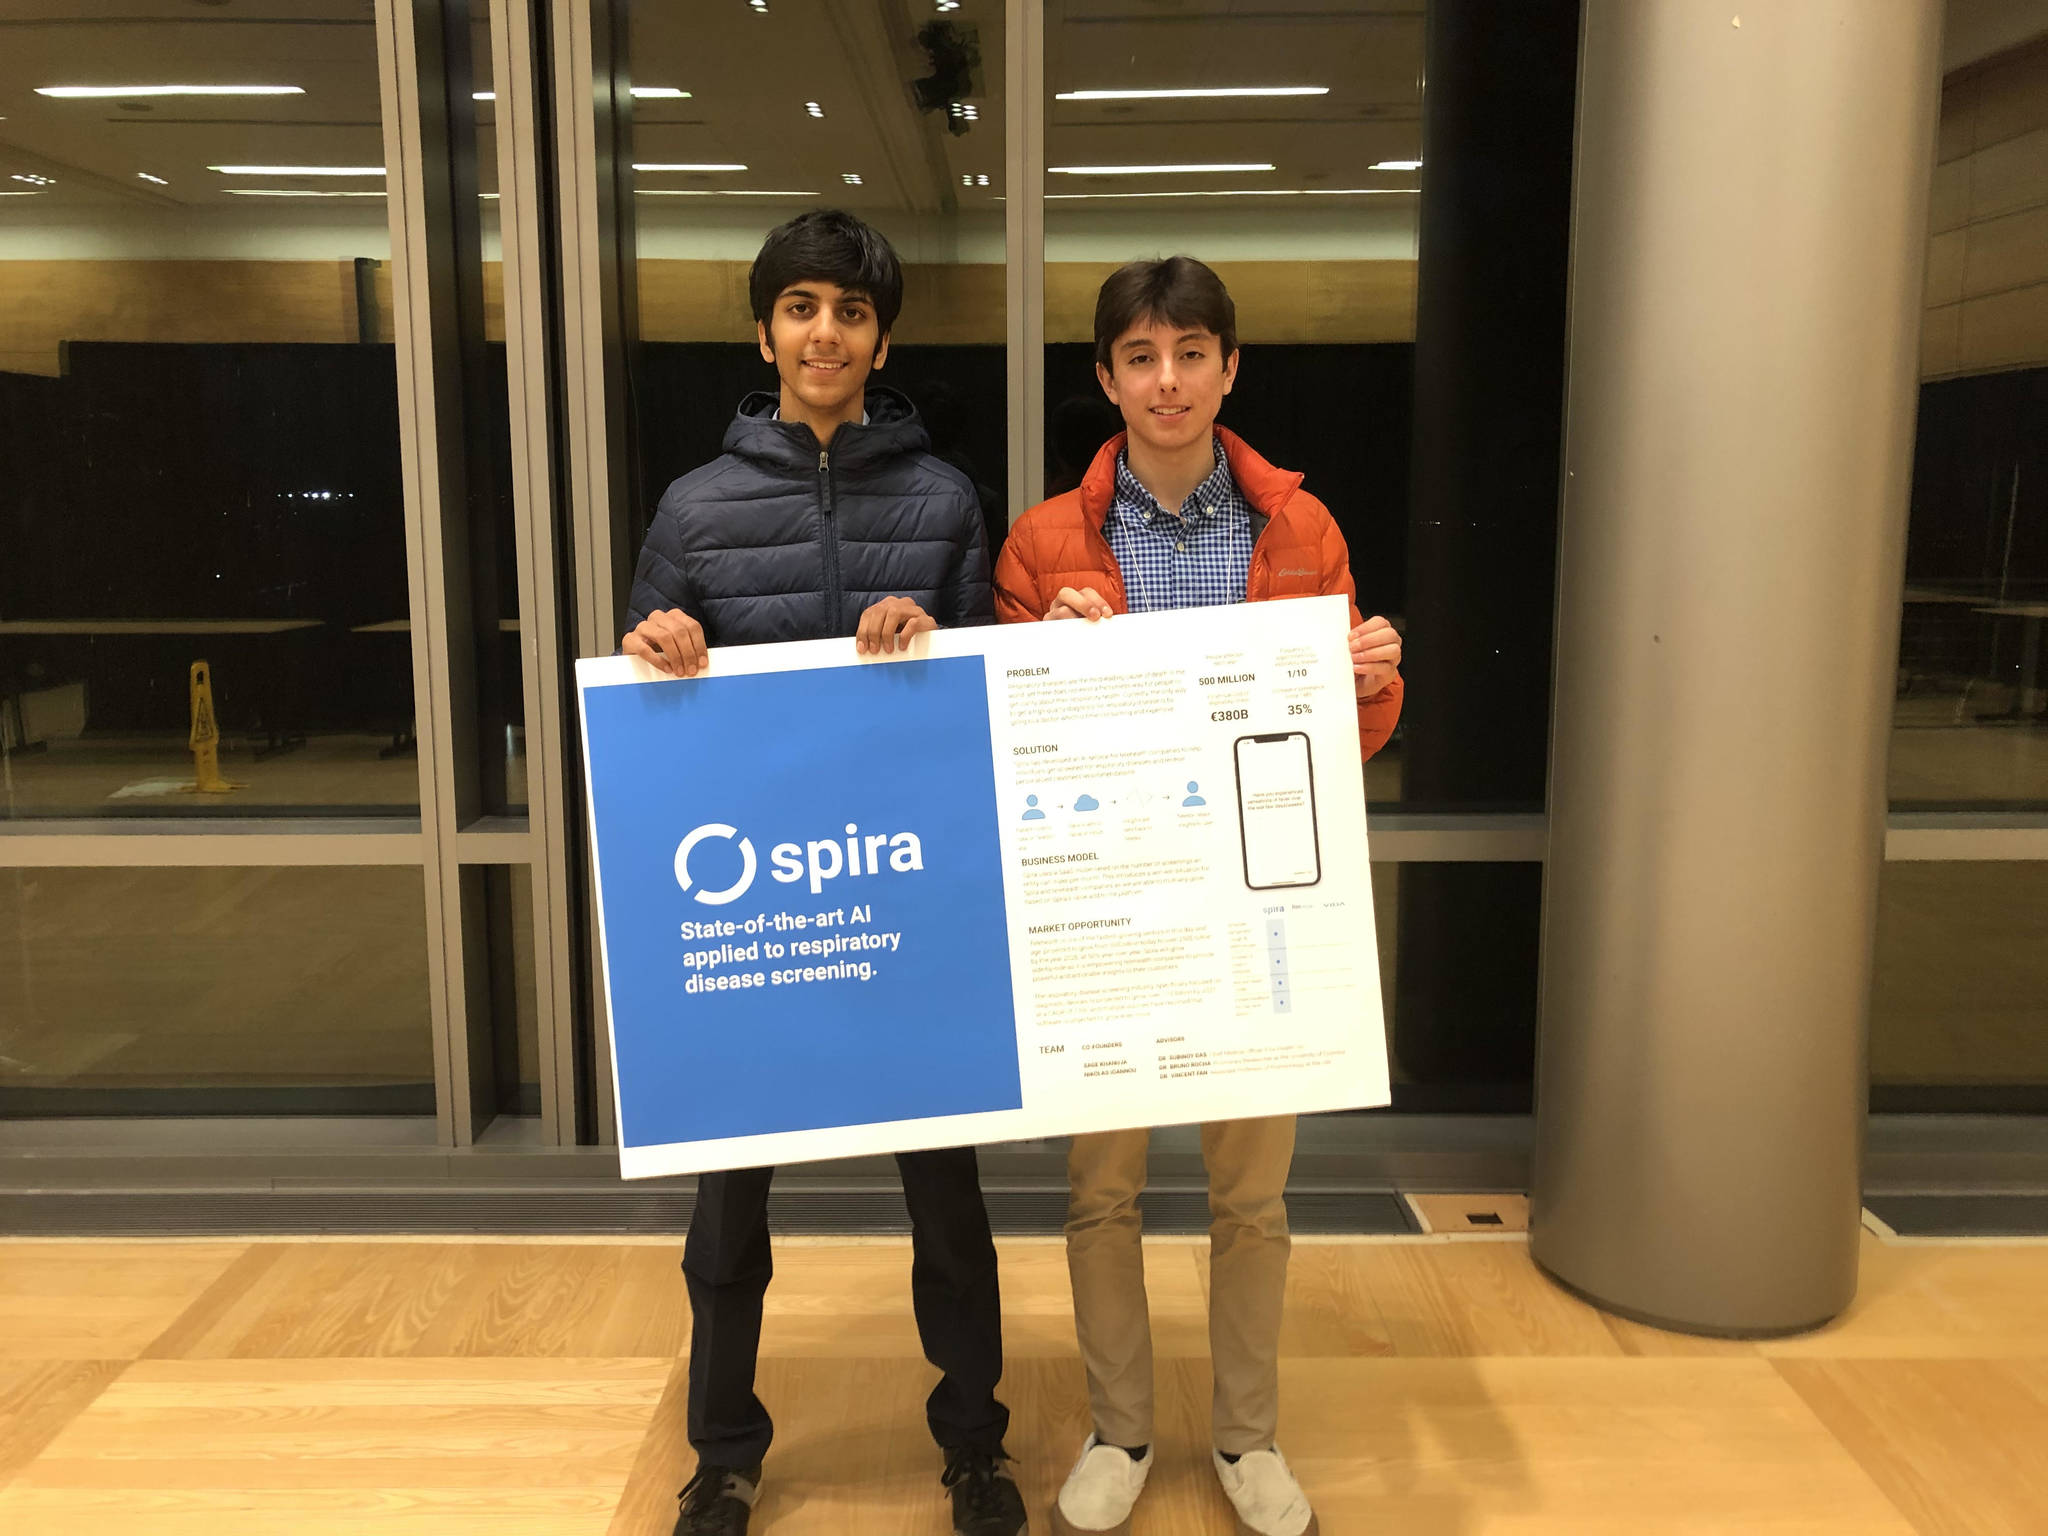 From left, Sage Khanuja and Nikolas Ioannou created the app Spira with the intention of tracking symptoms of respiratory diseases before the COVID-19 pandemic began. Photo courtesy of Sage Khanuja